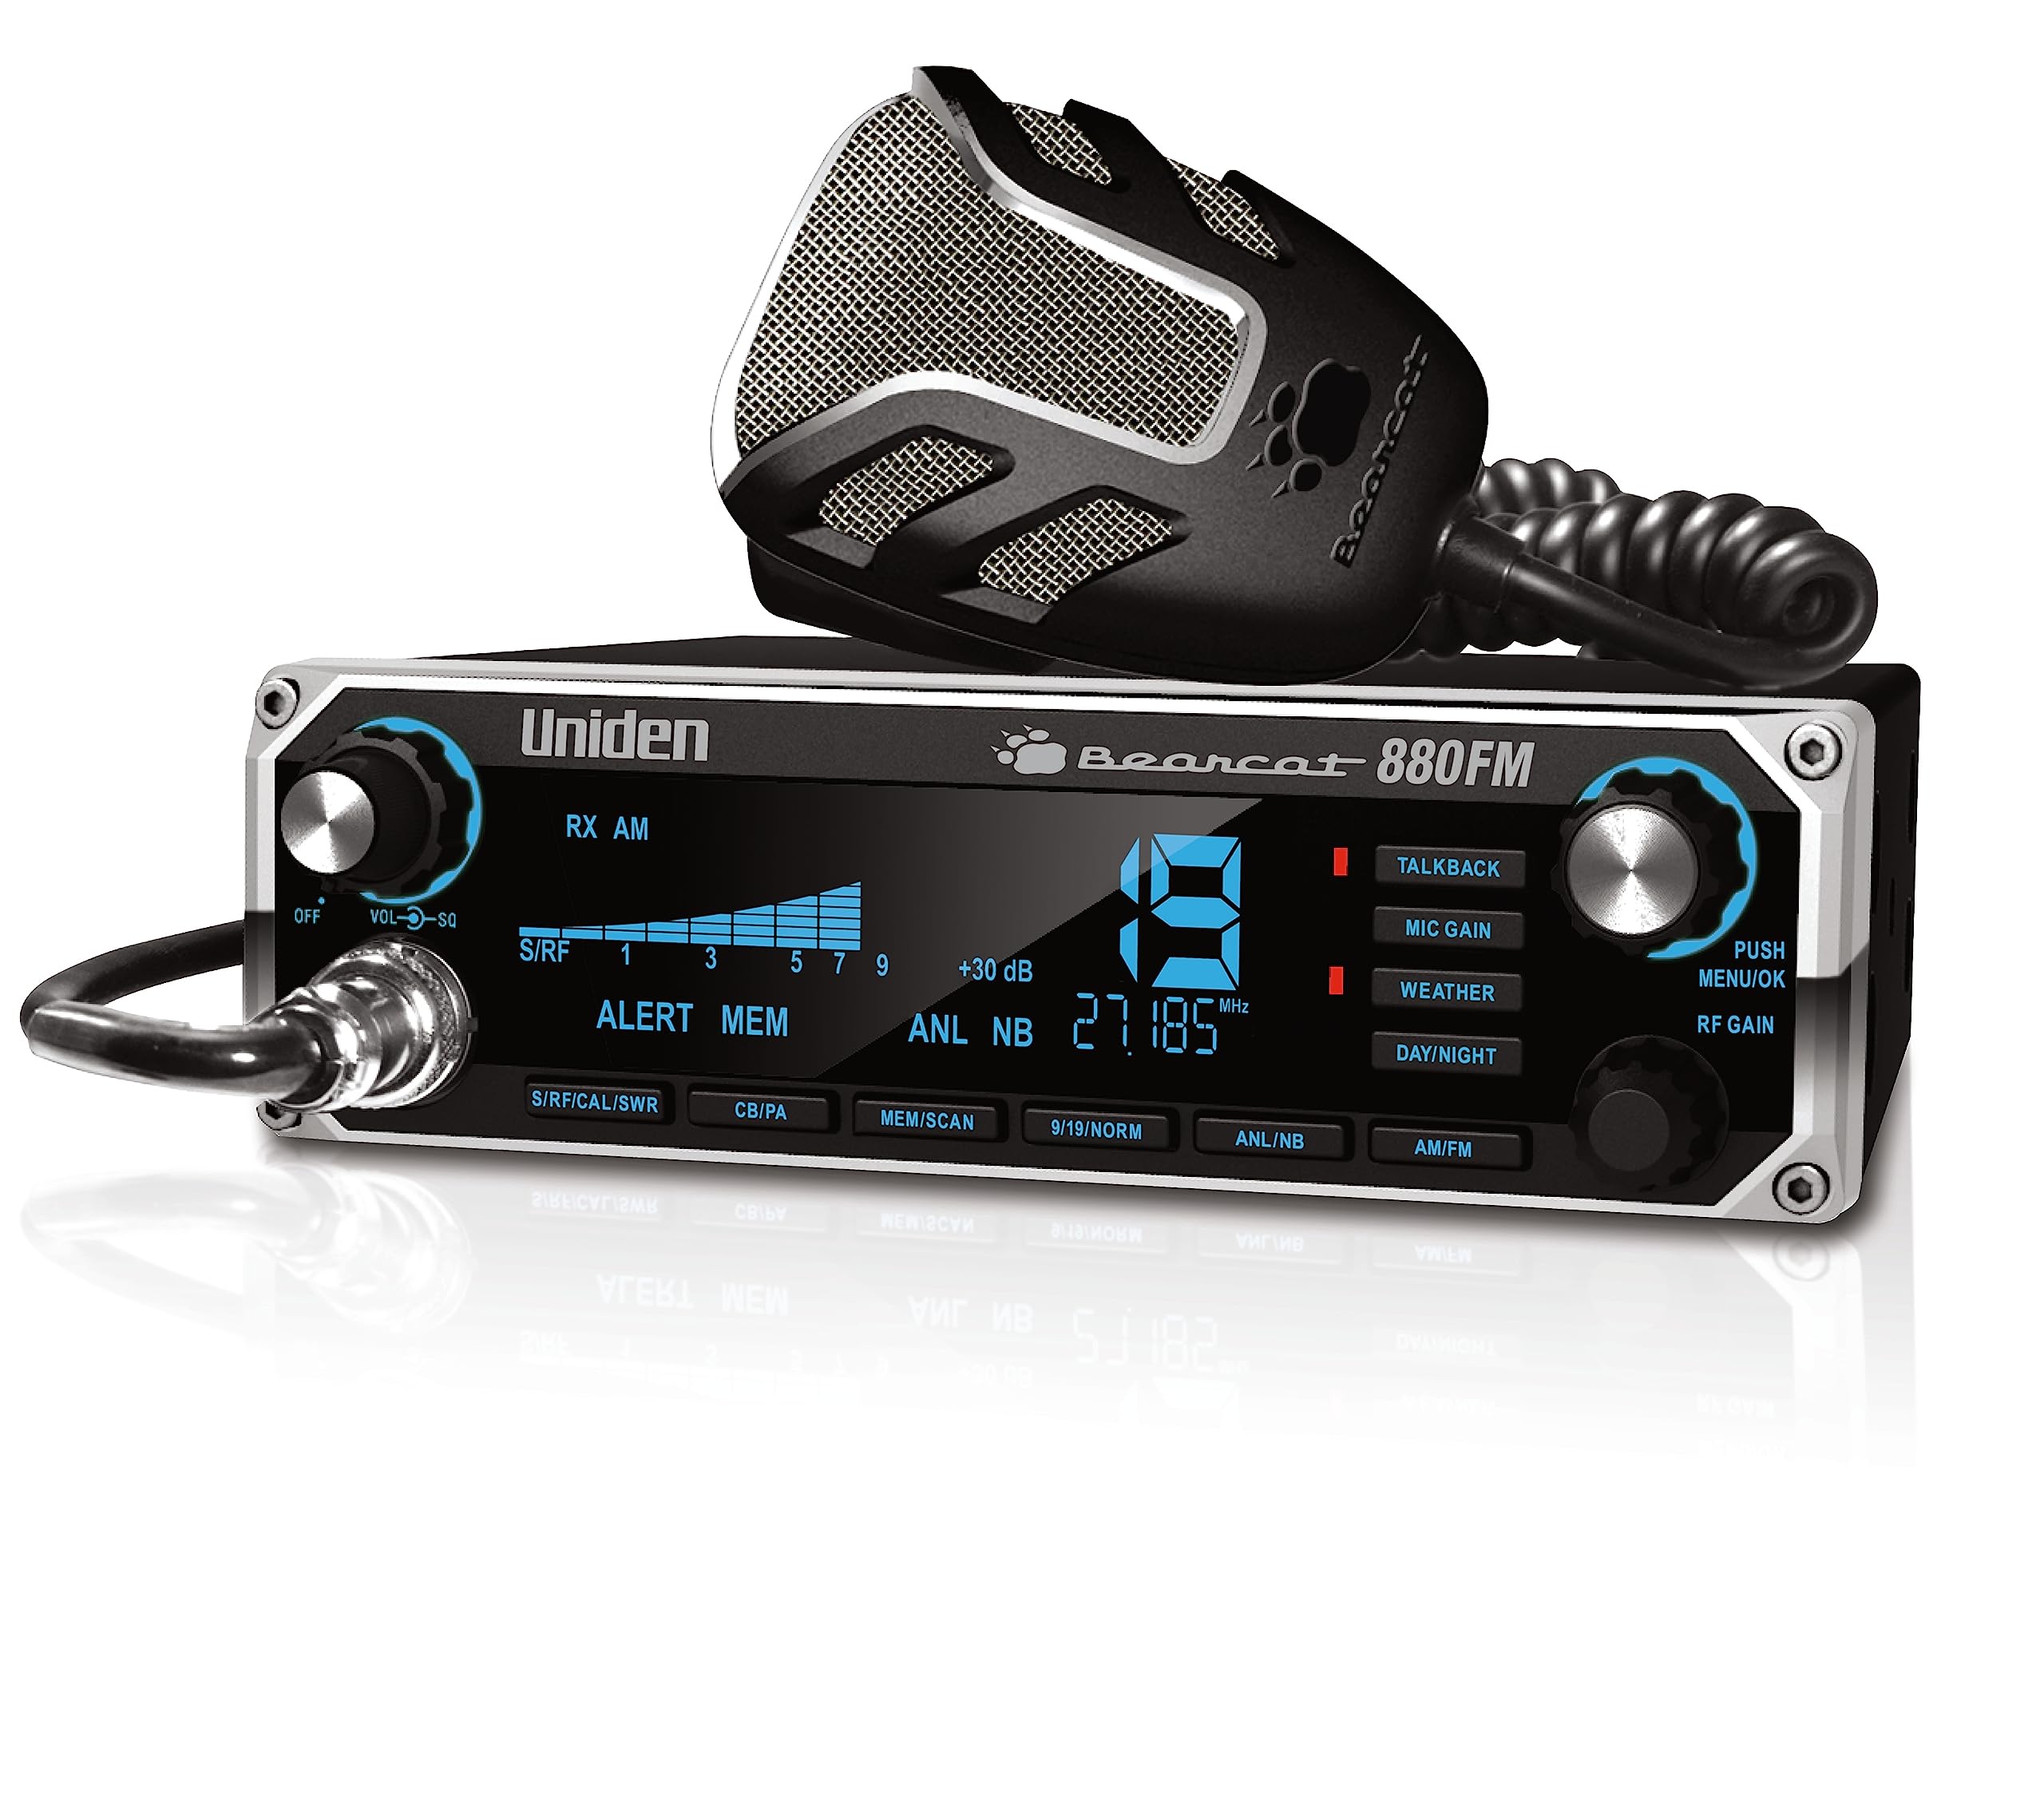 Uniden Bearcat 880FM CB Radio, 40 Channels with Dual-Mode AM/FM, Large Easy-to-Read Backlit 7-Color LCD Display, Backlit Knobs/Buttons, NOAA Weather Alert, PA/CB Switch, and Wireless Mic Compatible